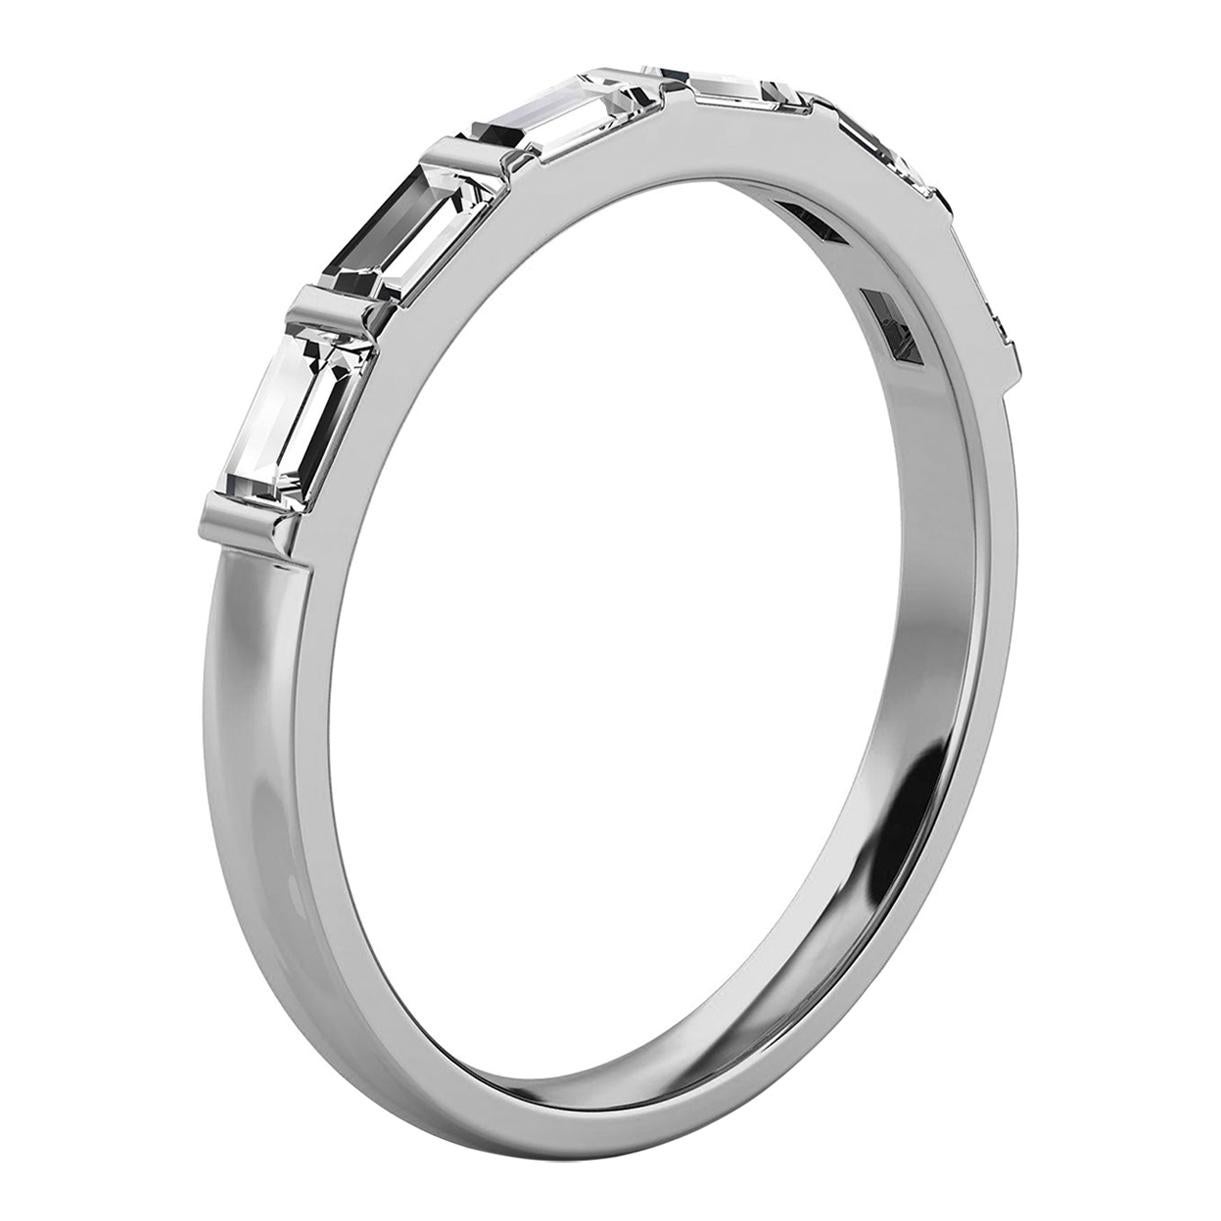 14k White Gold Lindie Baguette Organic Design Diamond Ring '1/2 Ct. Tw' For Sale